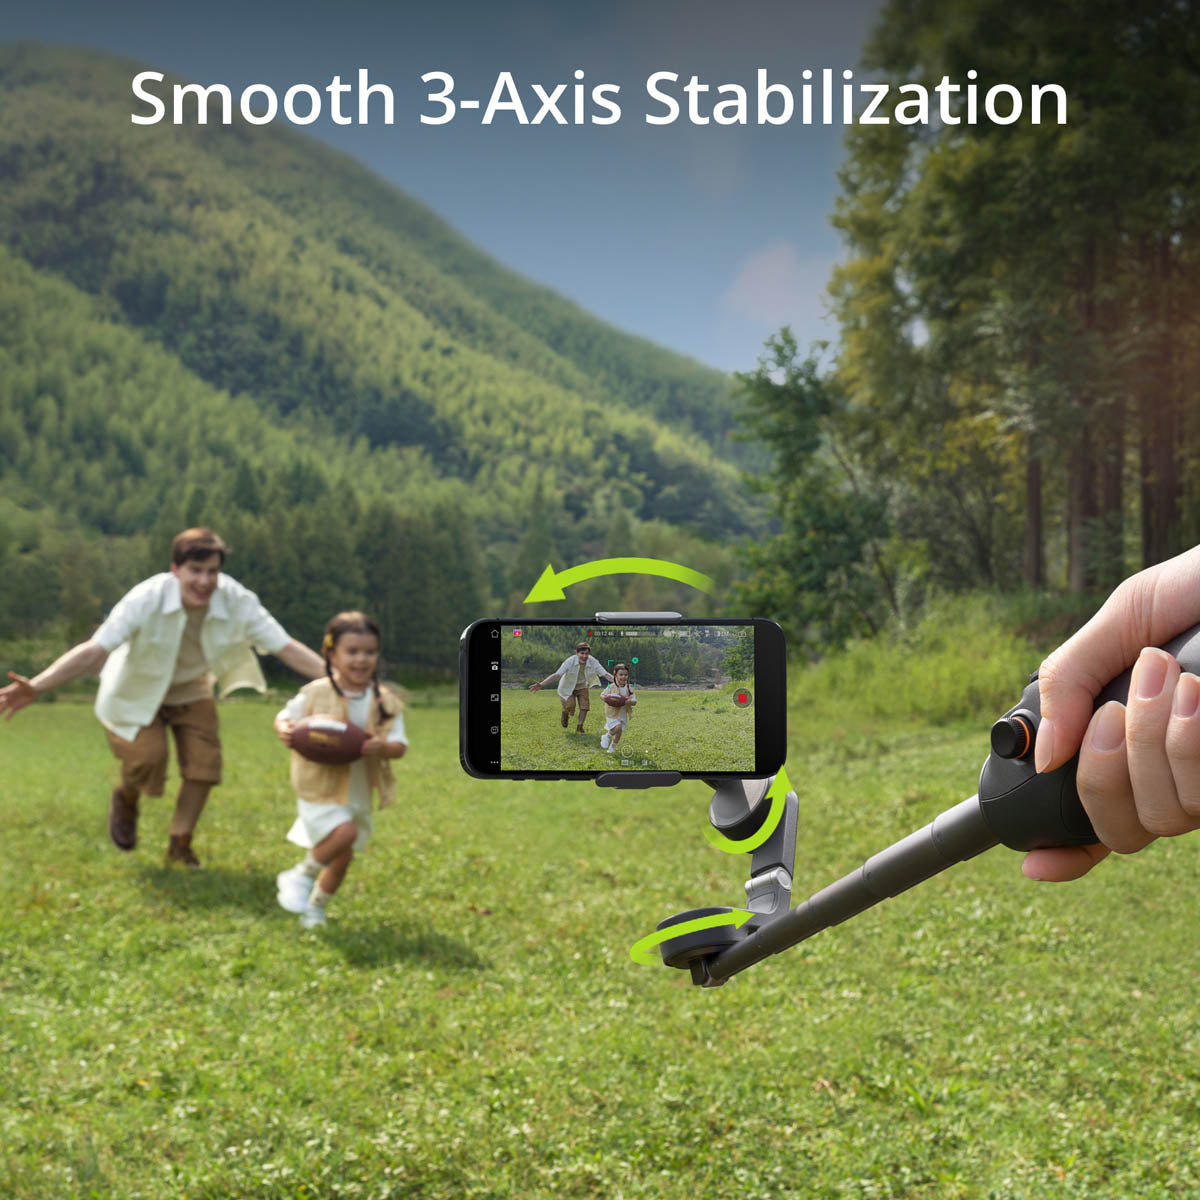 DJI OSMO Mobile 6 3-Axis handheld Gimbal Stabilizer foldable for Mobile  Phone